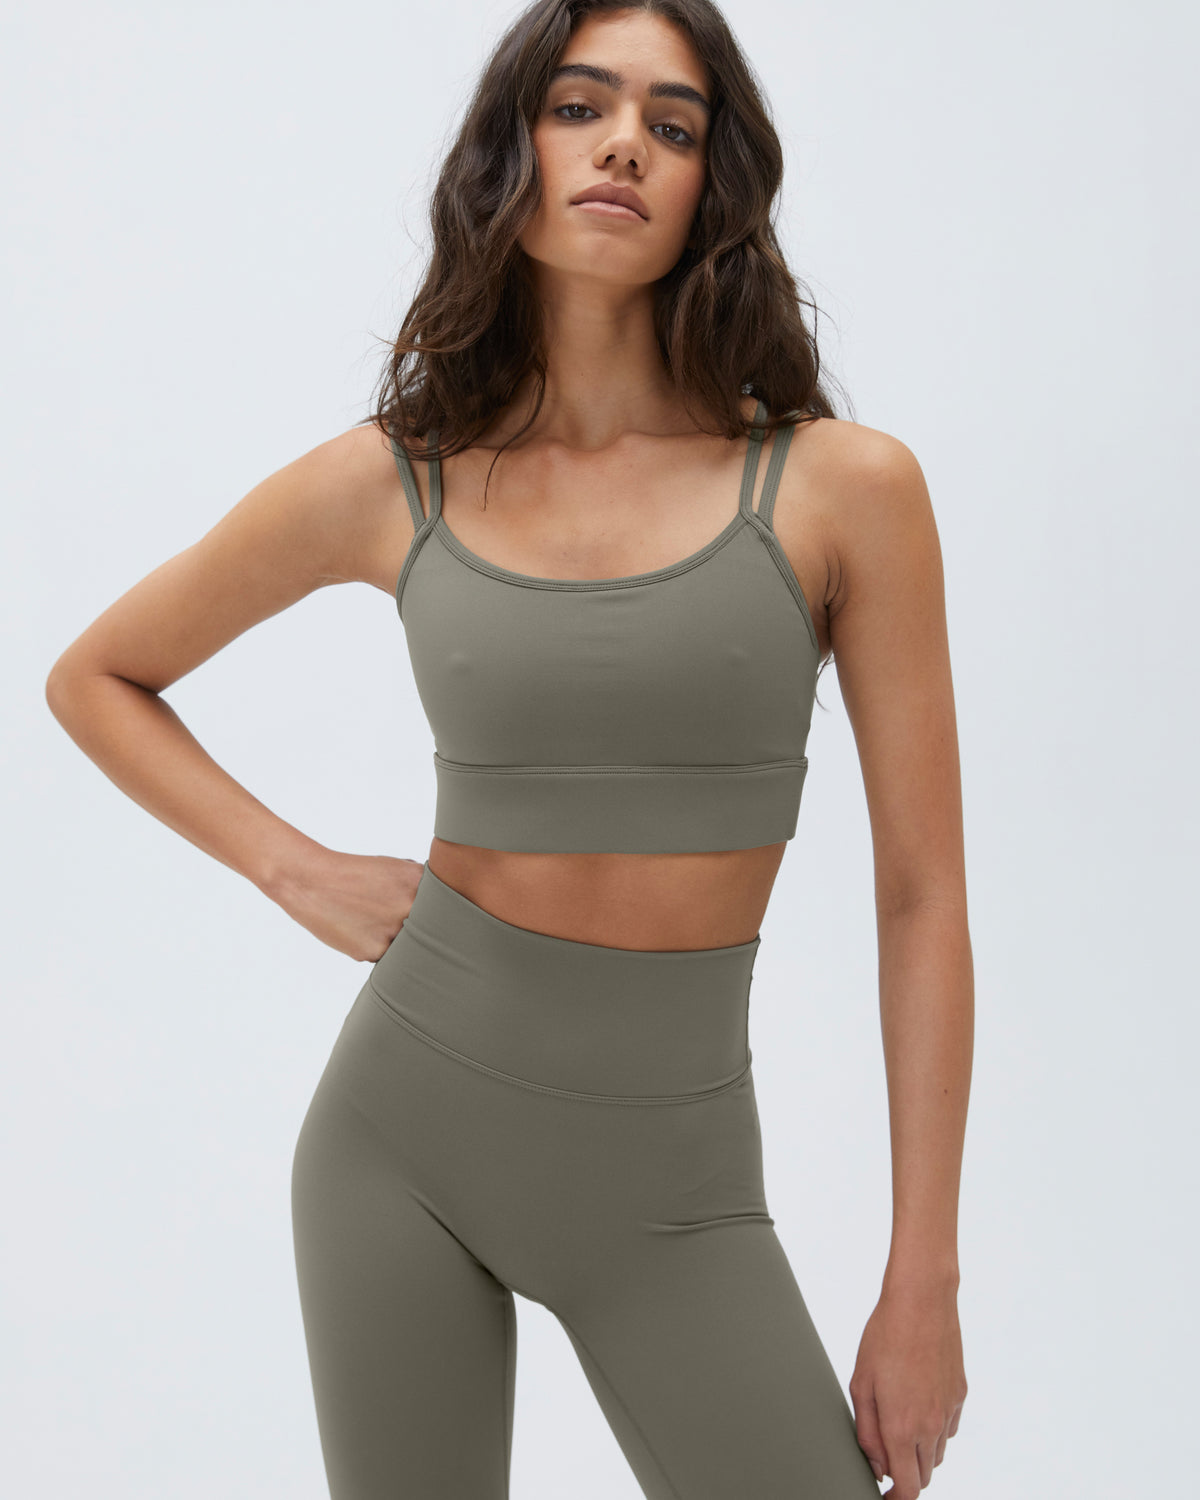 Hold Your Gaze Olive Green Leggings  Outfits with leggings, Green leggings  outfit, Green leggings